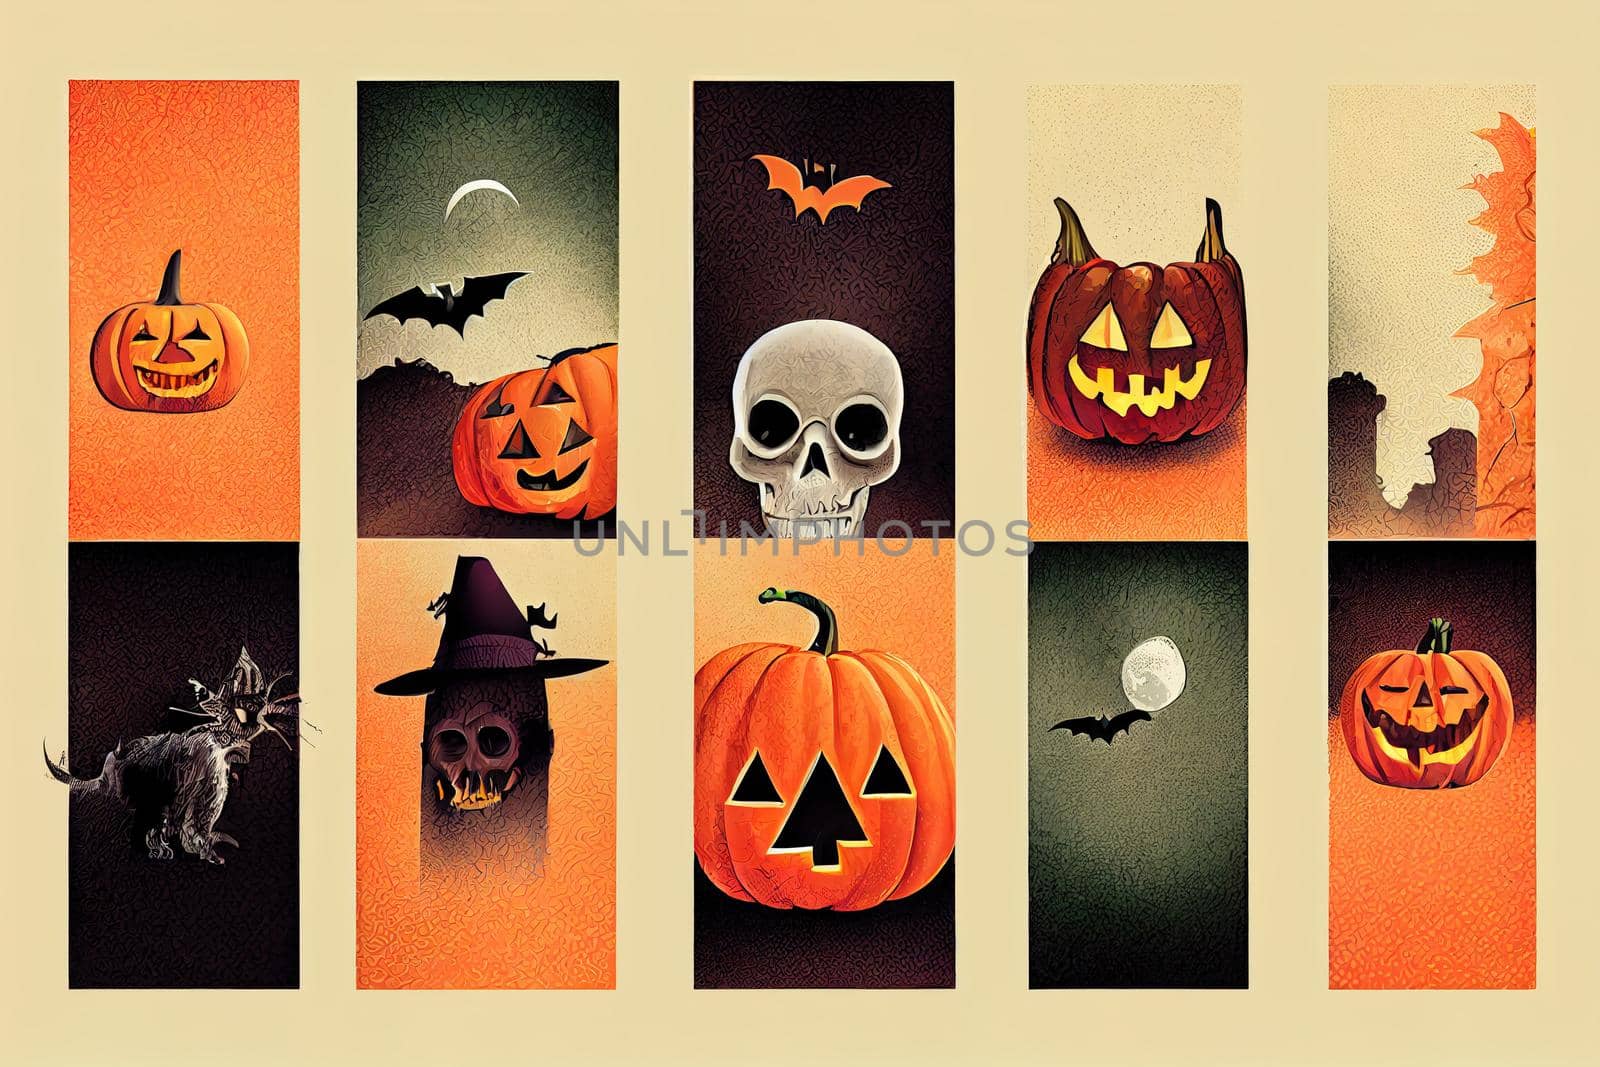 A set of assorted illustrations for Halloween by 2ragon